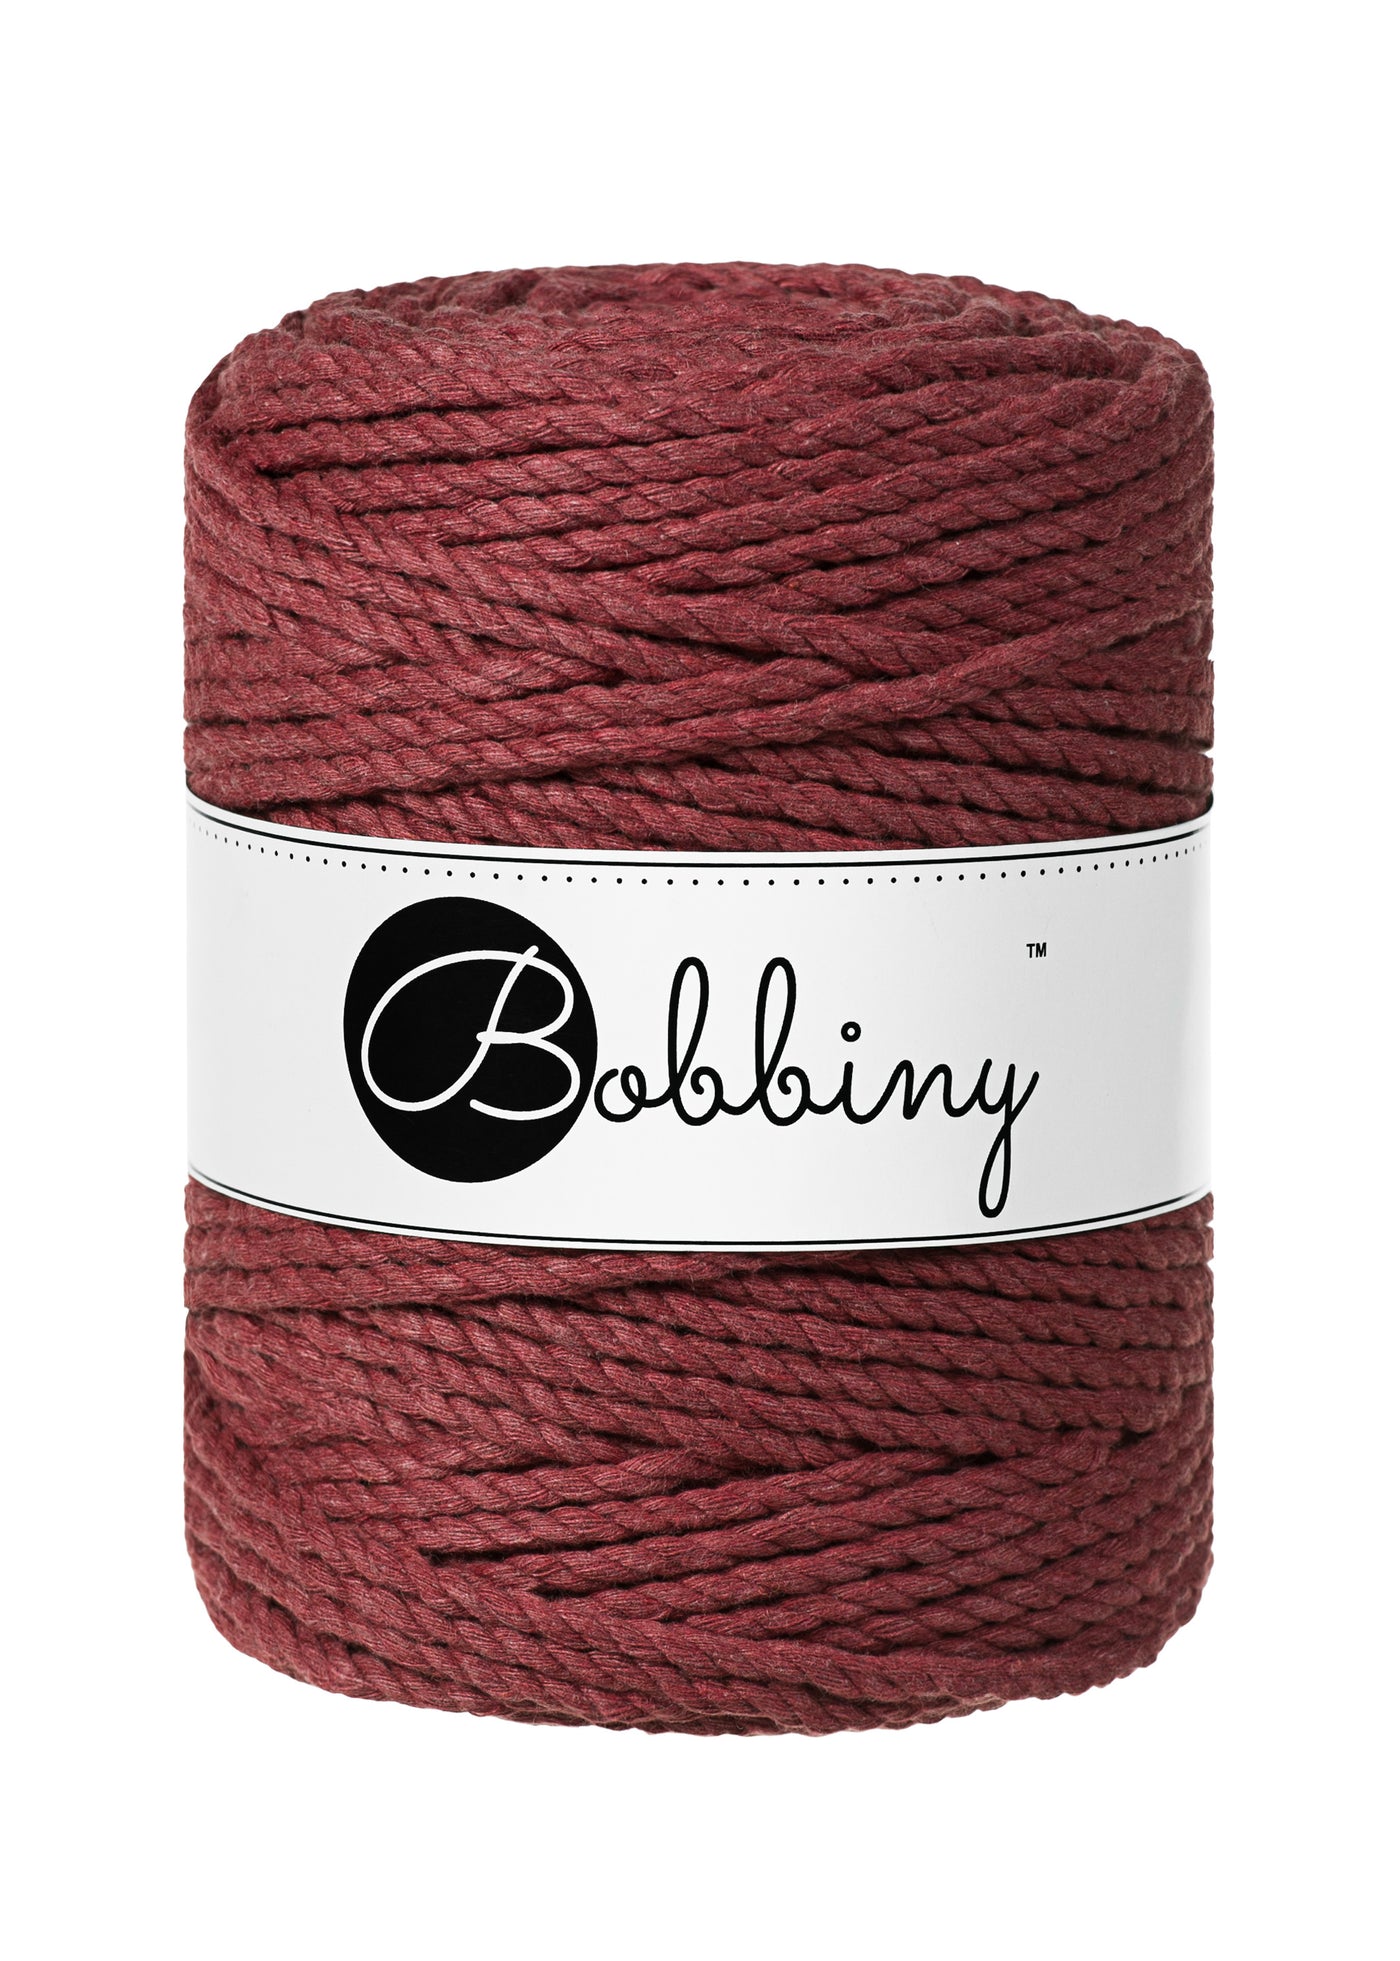 This superb new product from Bobbiny is the latest addition to their gorgeous range of products.  Made from 100% recycled cotton, it is perfect for Macrame projects due to its sturdiness. It contains no harmful dyes or chemicals and is OEKO-TEX certified.  This super soft triple twist rope also makes the most spectacular fringes and tassels.  Length: 100m (108 Yards)  Weight: 800gms  Contains 120 Fibres ( 3x40 )  Also available in 3mm